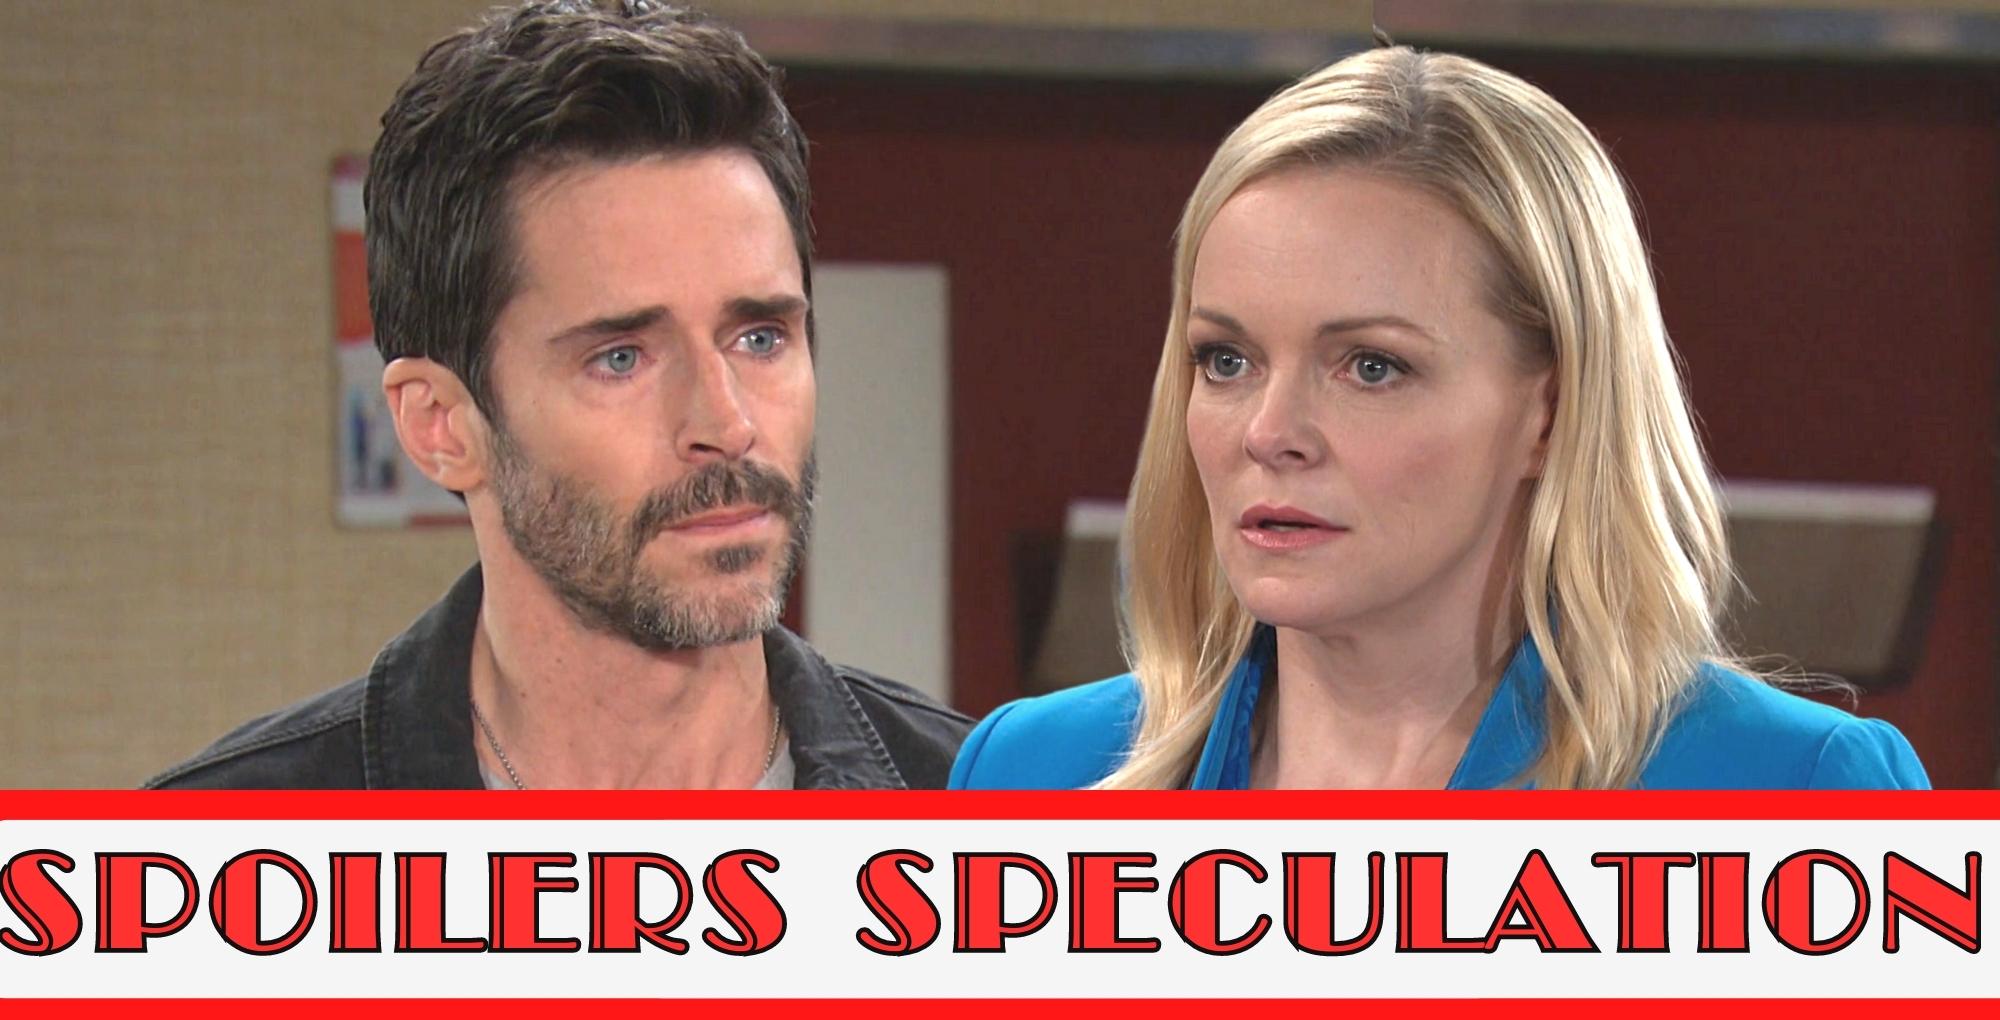 days spoilers speculation about shawn and belle falling apart.